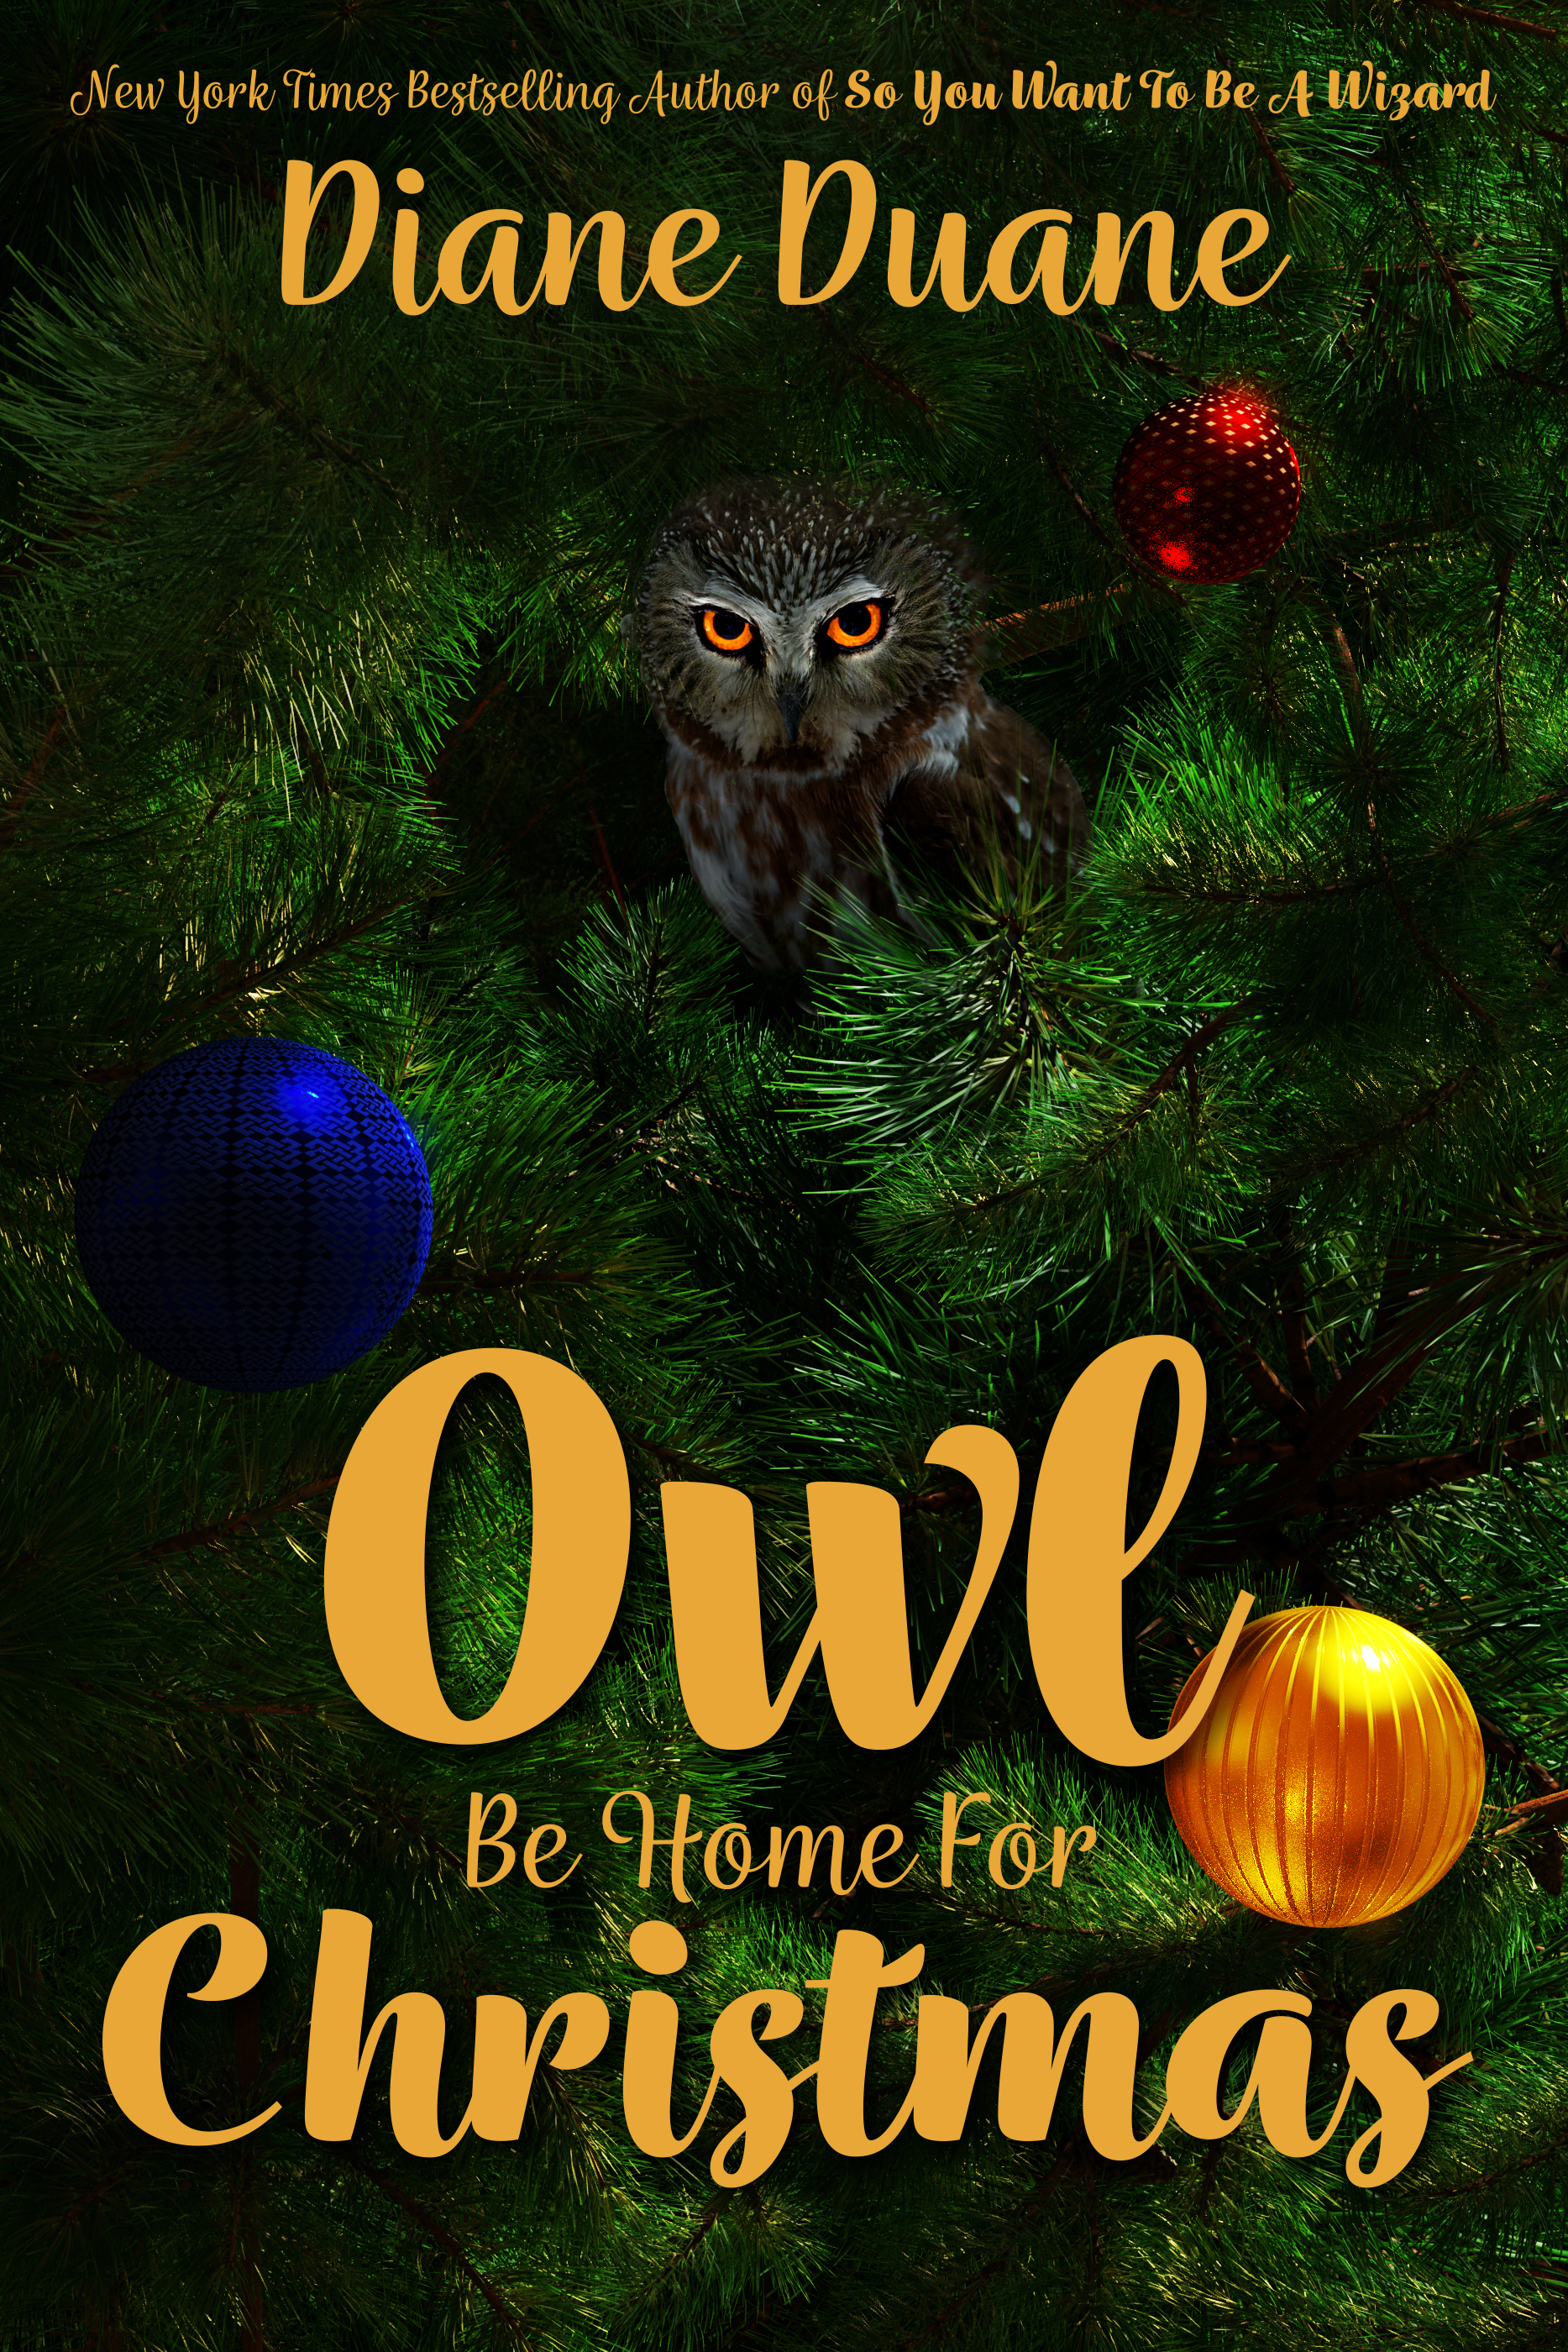 Owl Be Home For Christmas cover